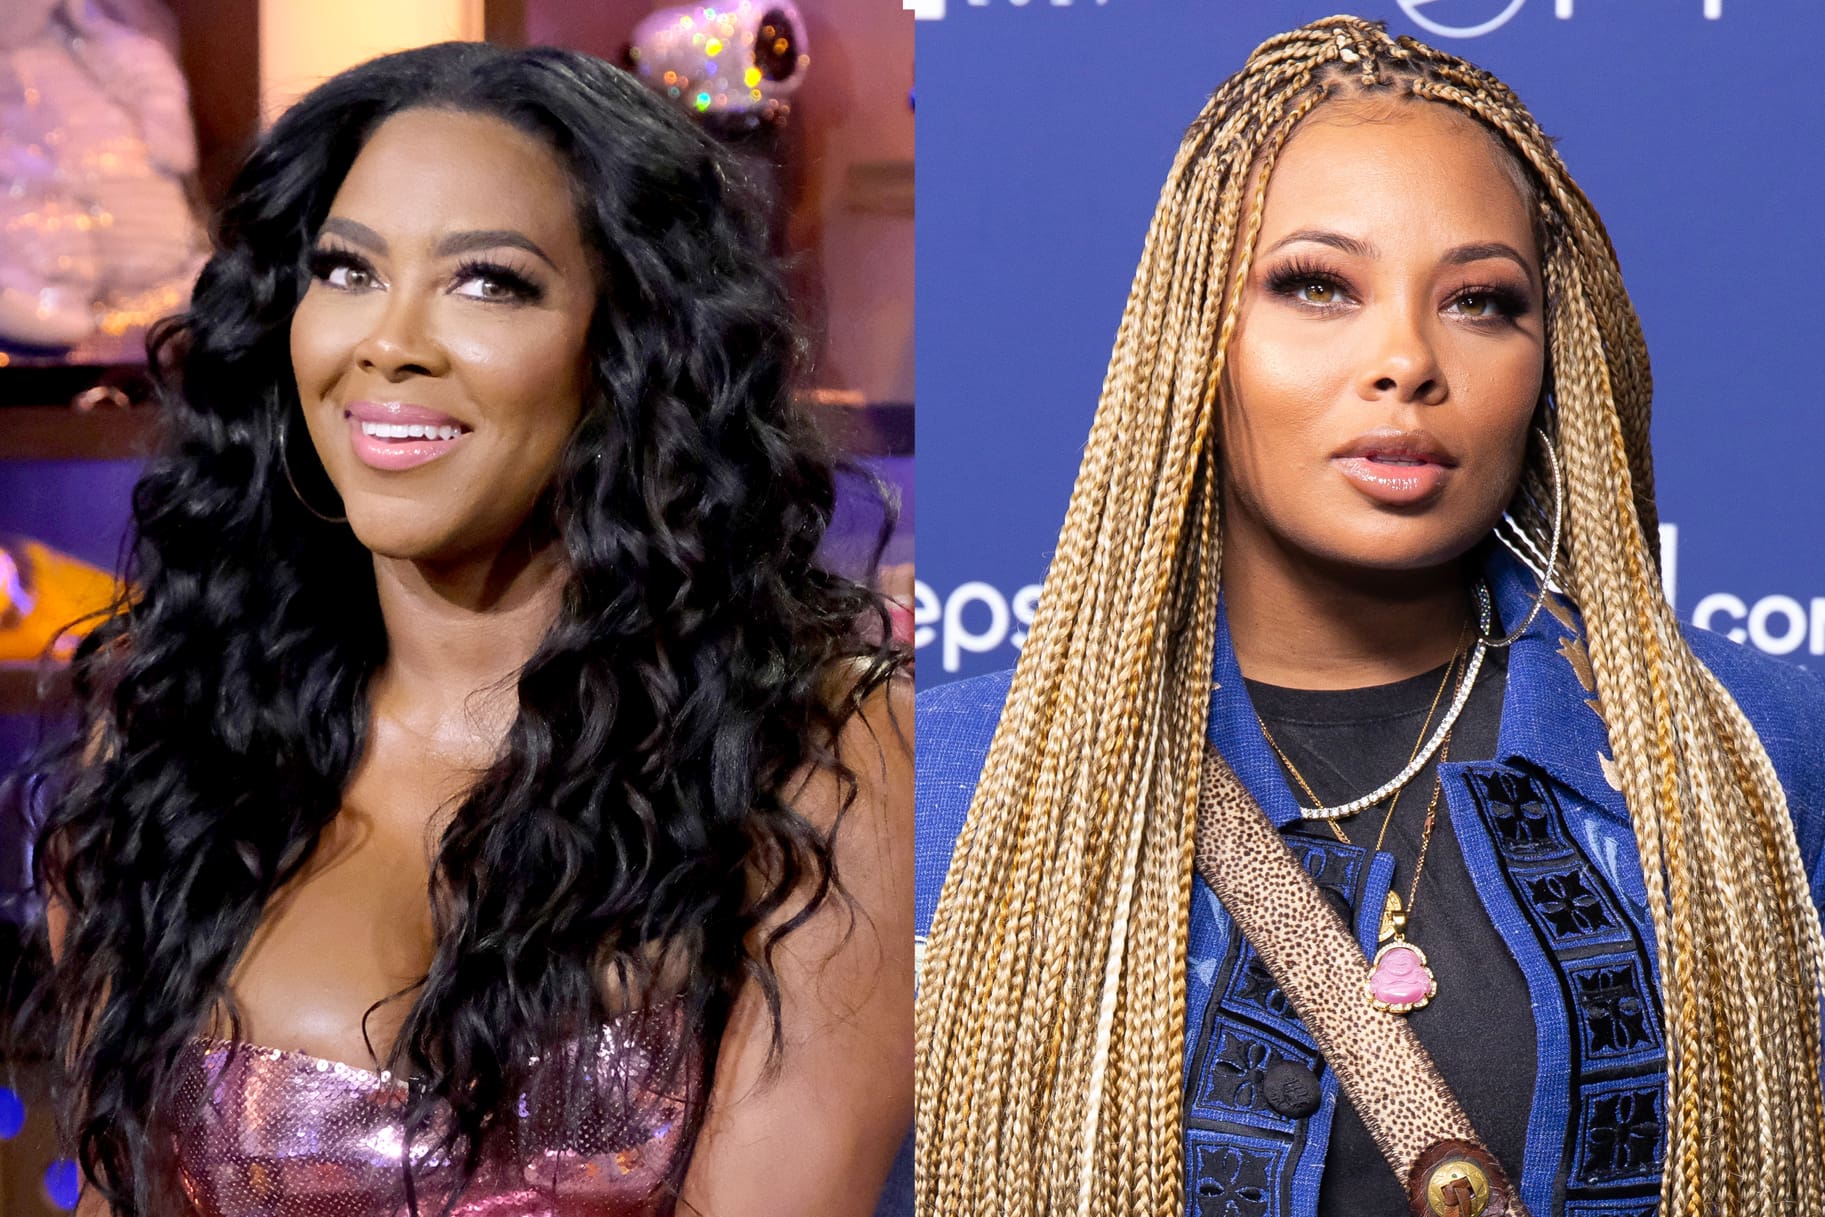 Kenya Moore Shares The Sweetest Photo Of Her Daughter, Brooklyn Daly And Her BFF, Eva Marcille's Boy, Mikey